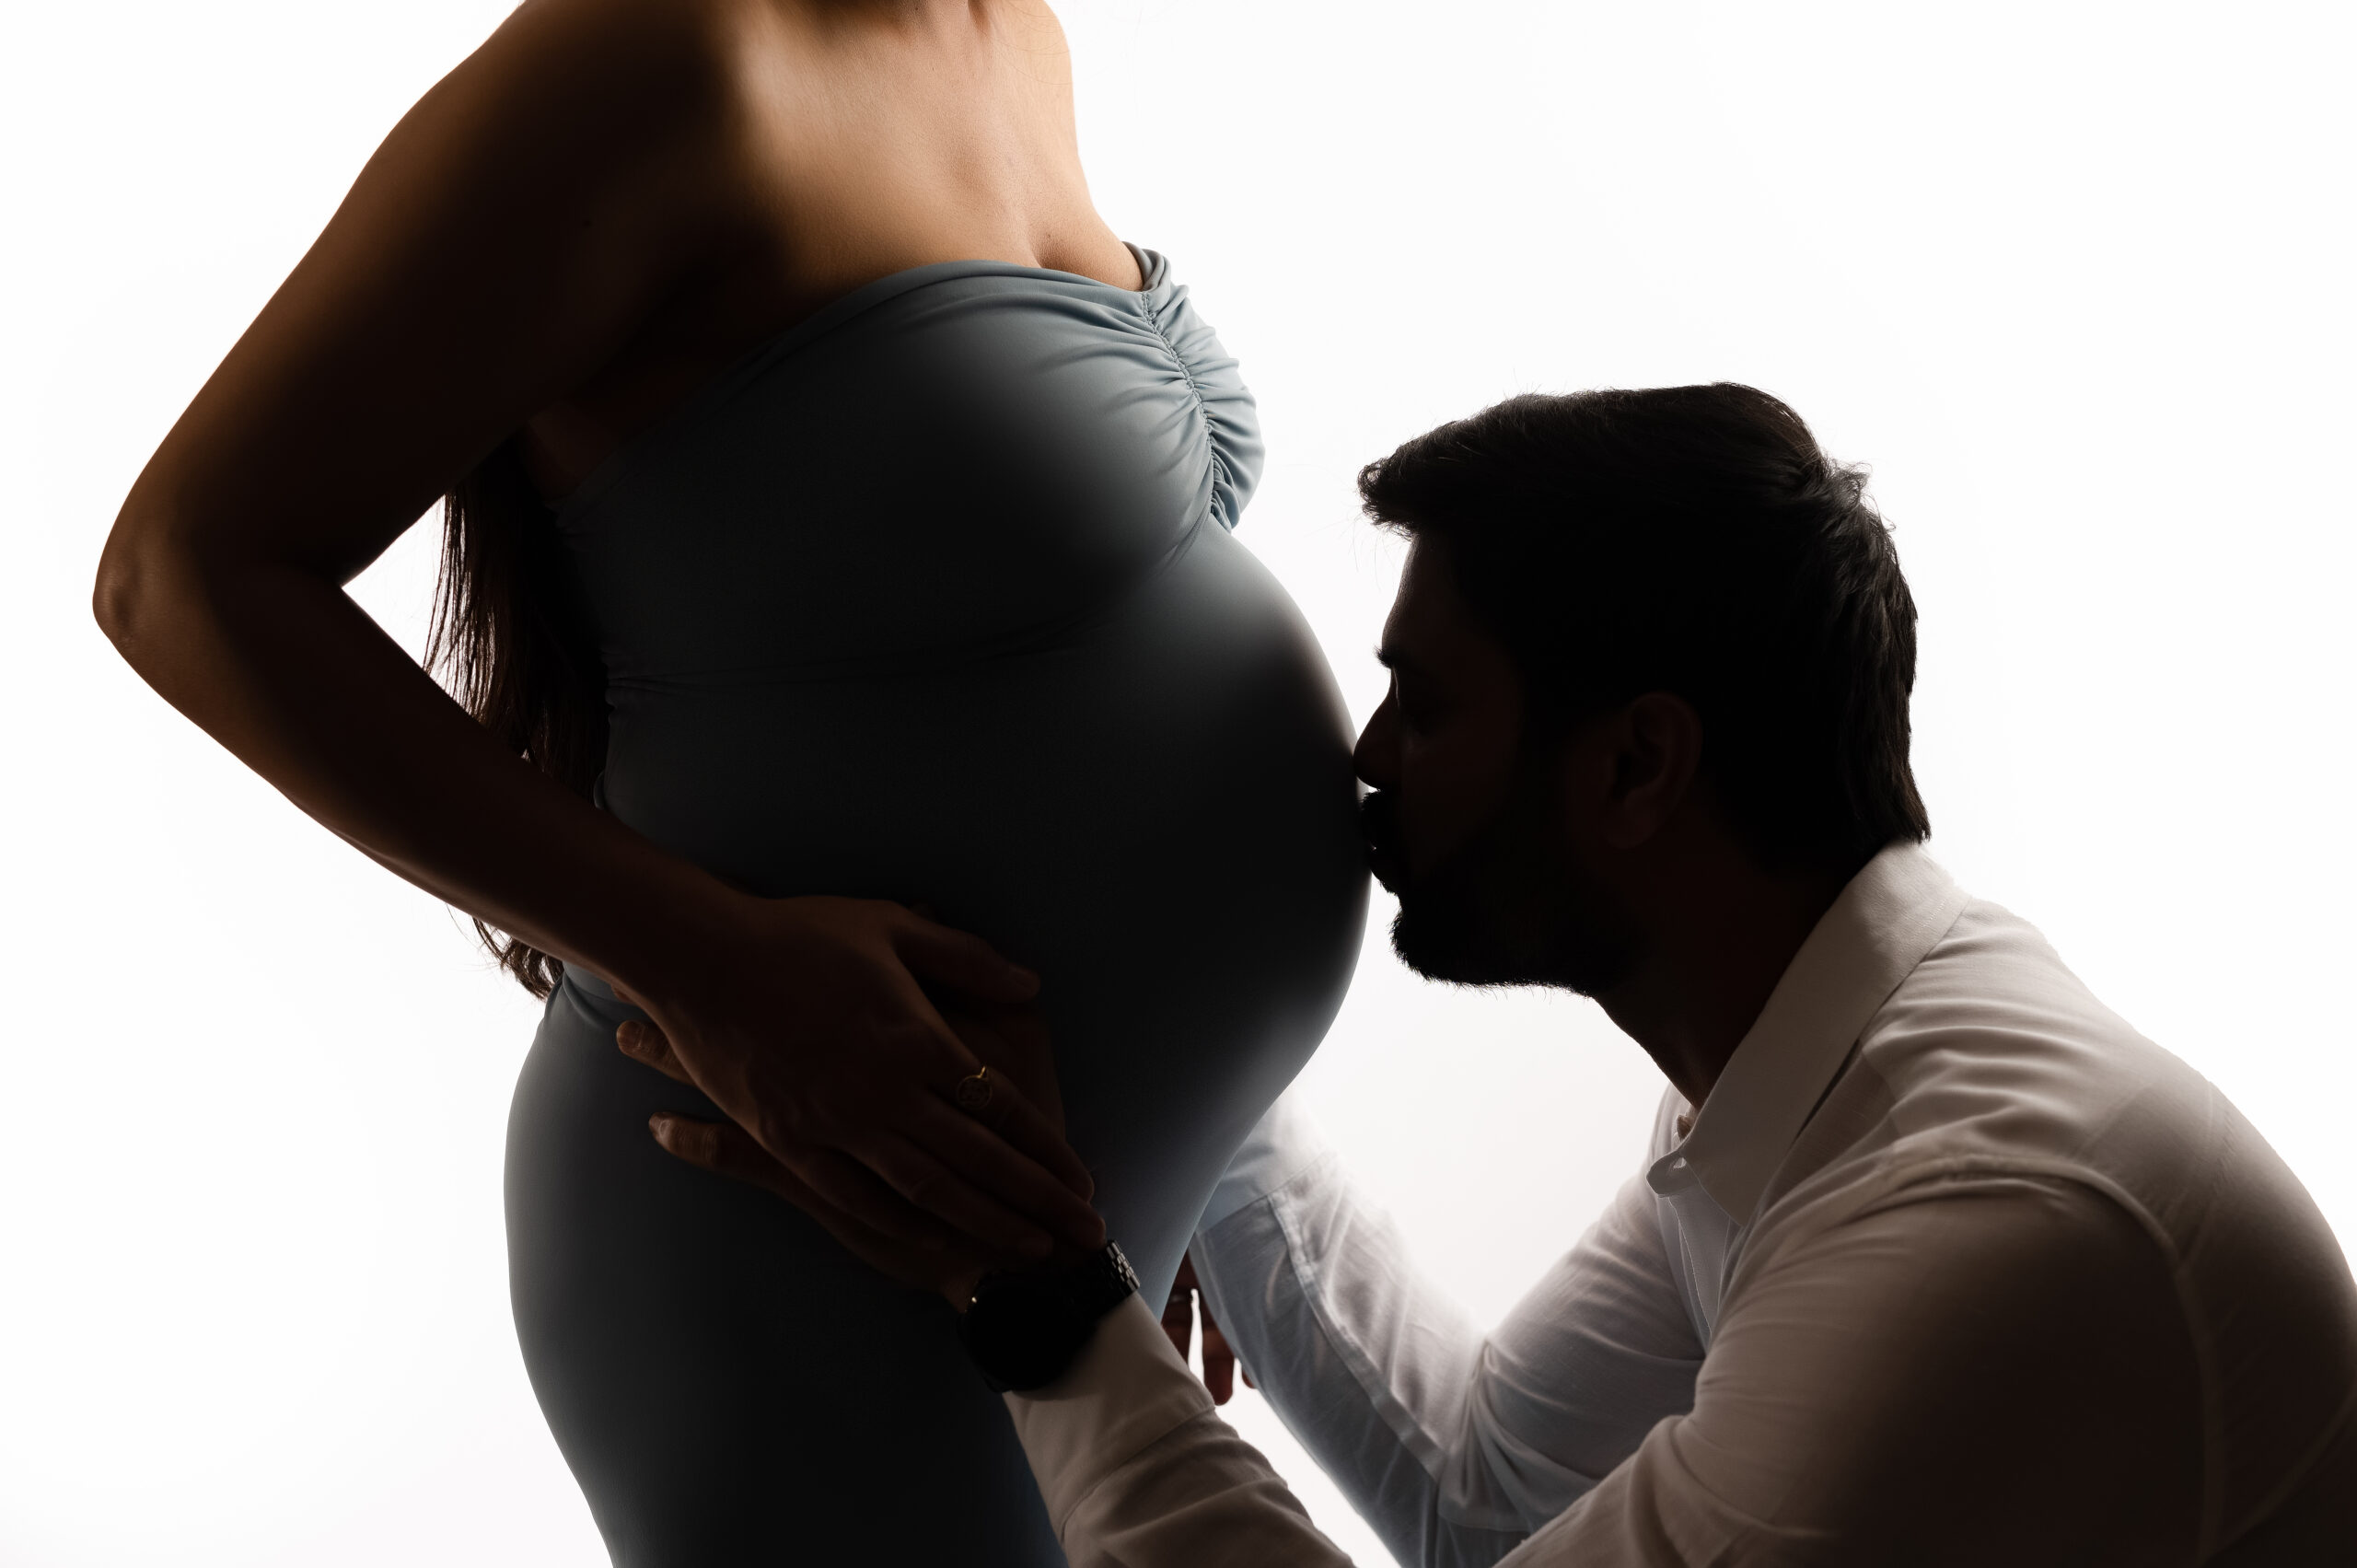 Father-to-be kissing the belly of mother-to-be during a maternity photoshoot